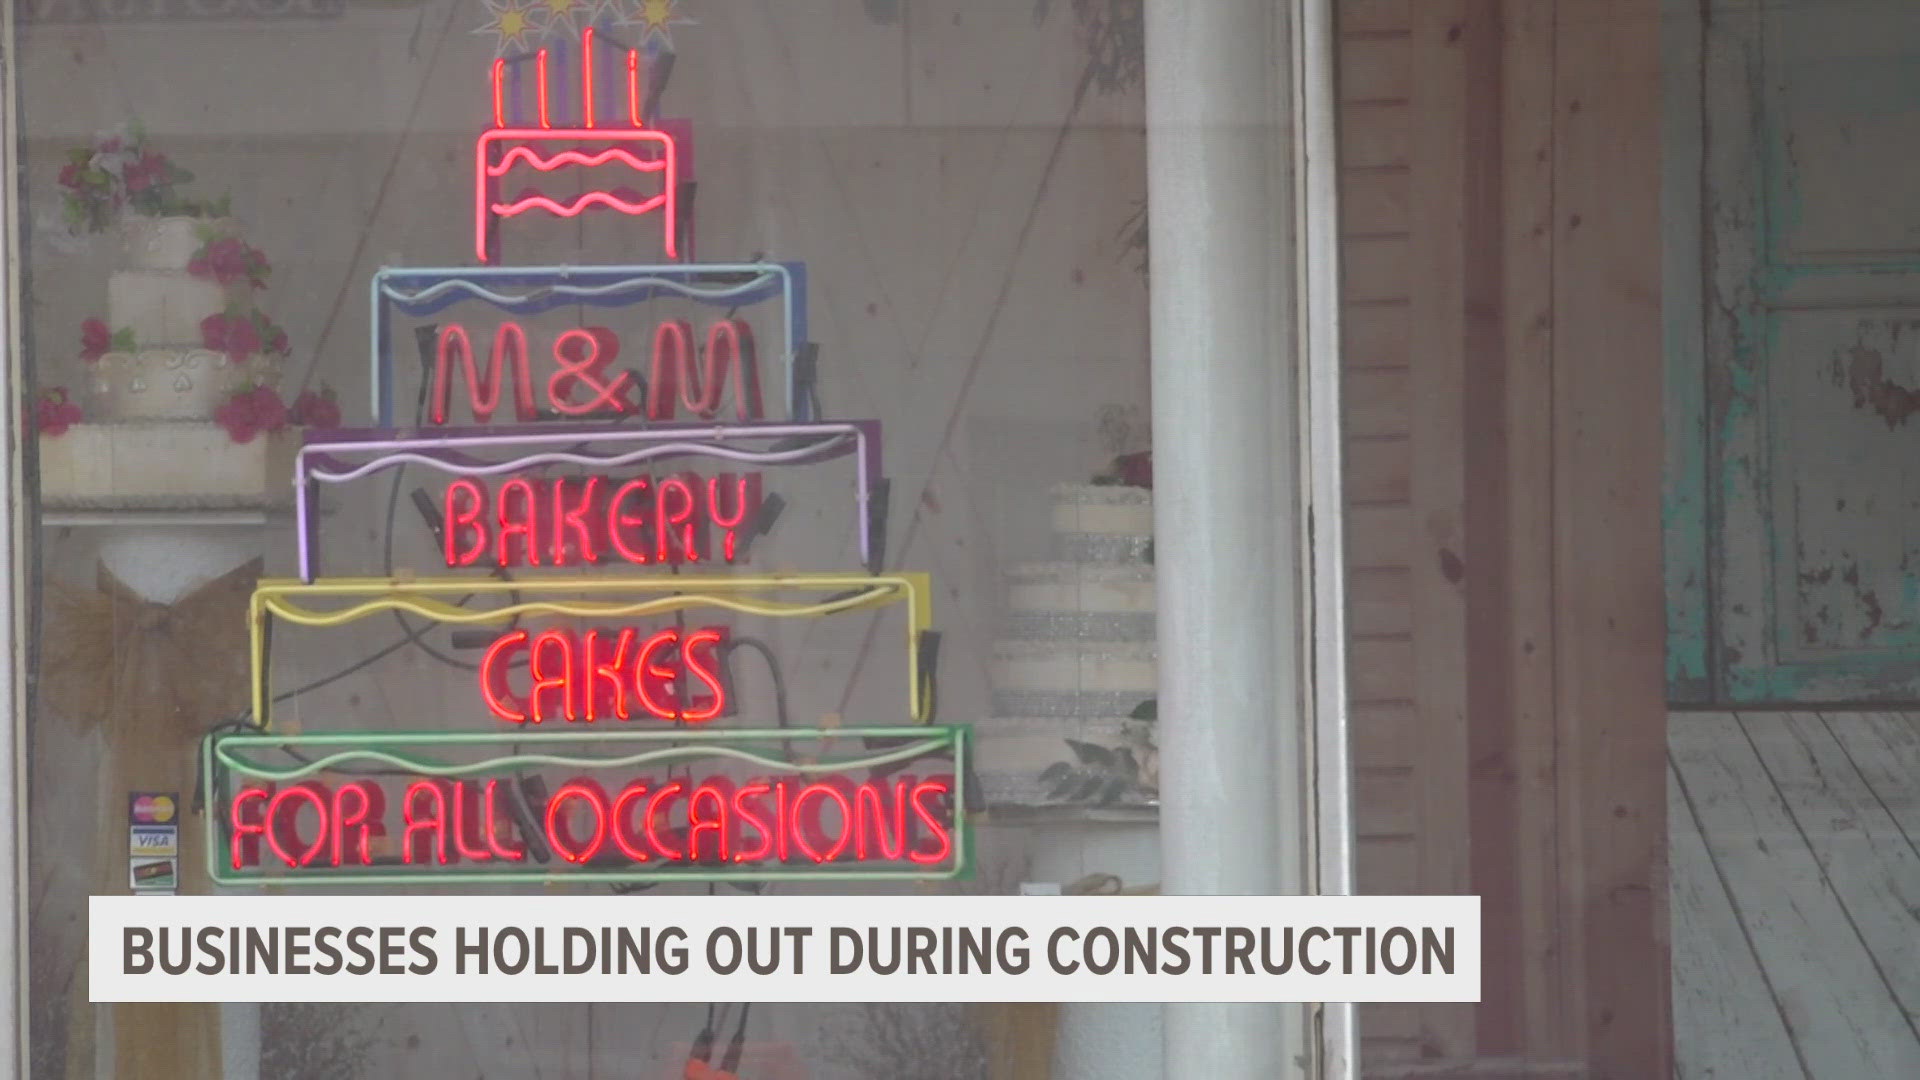 While the road is torn up the construction is impacting local businesses.